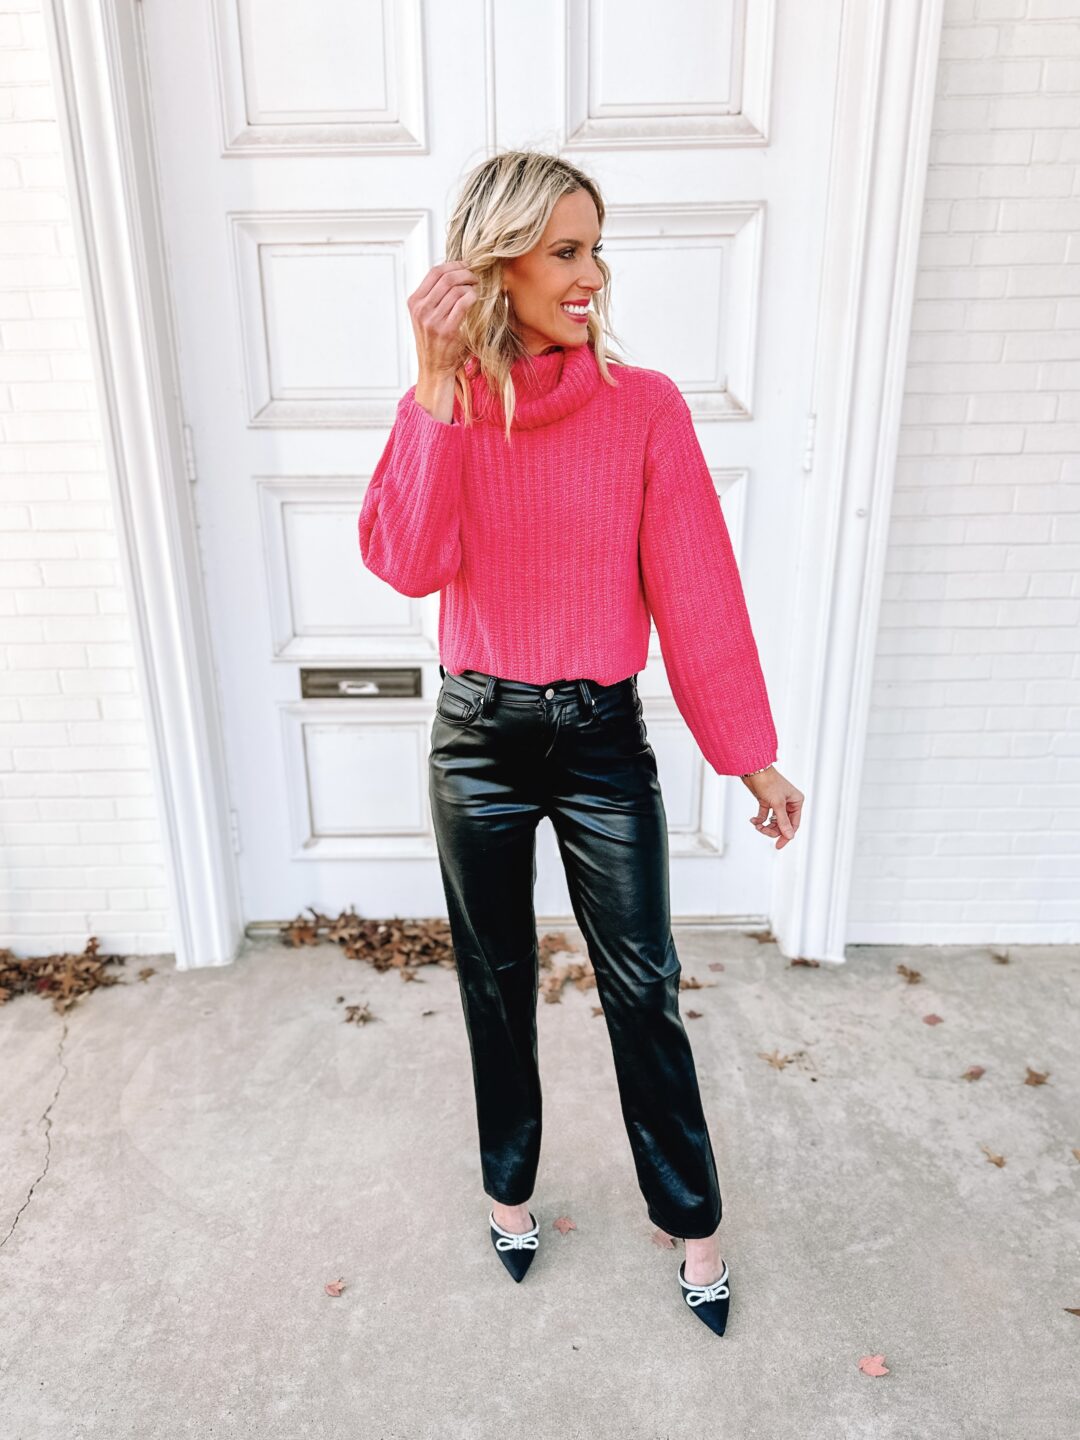 Faux Leather Pants Outfit Ideas - Doused in Pink